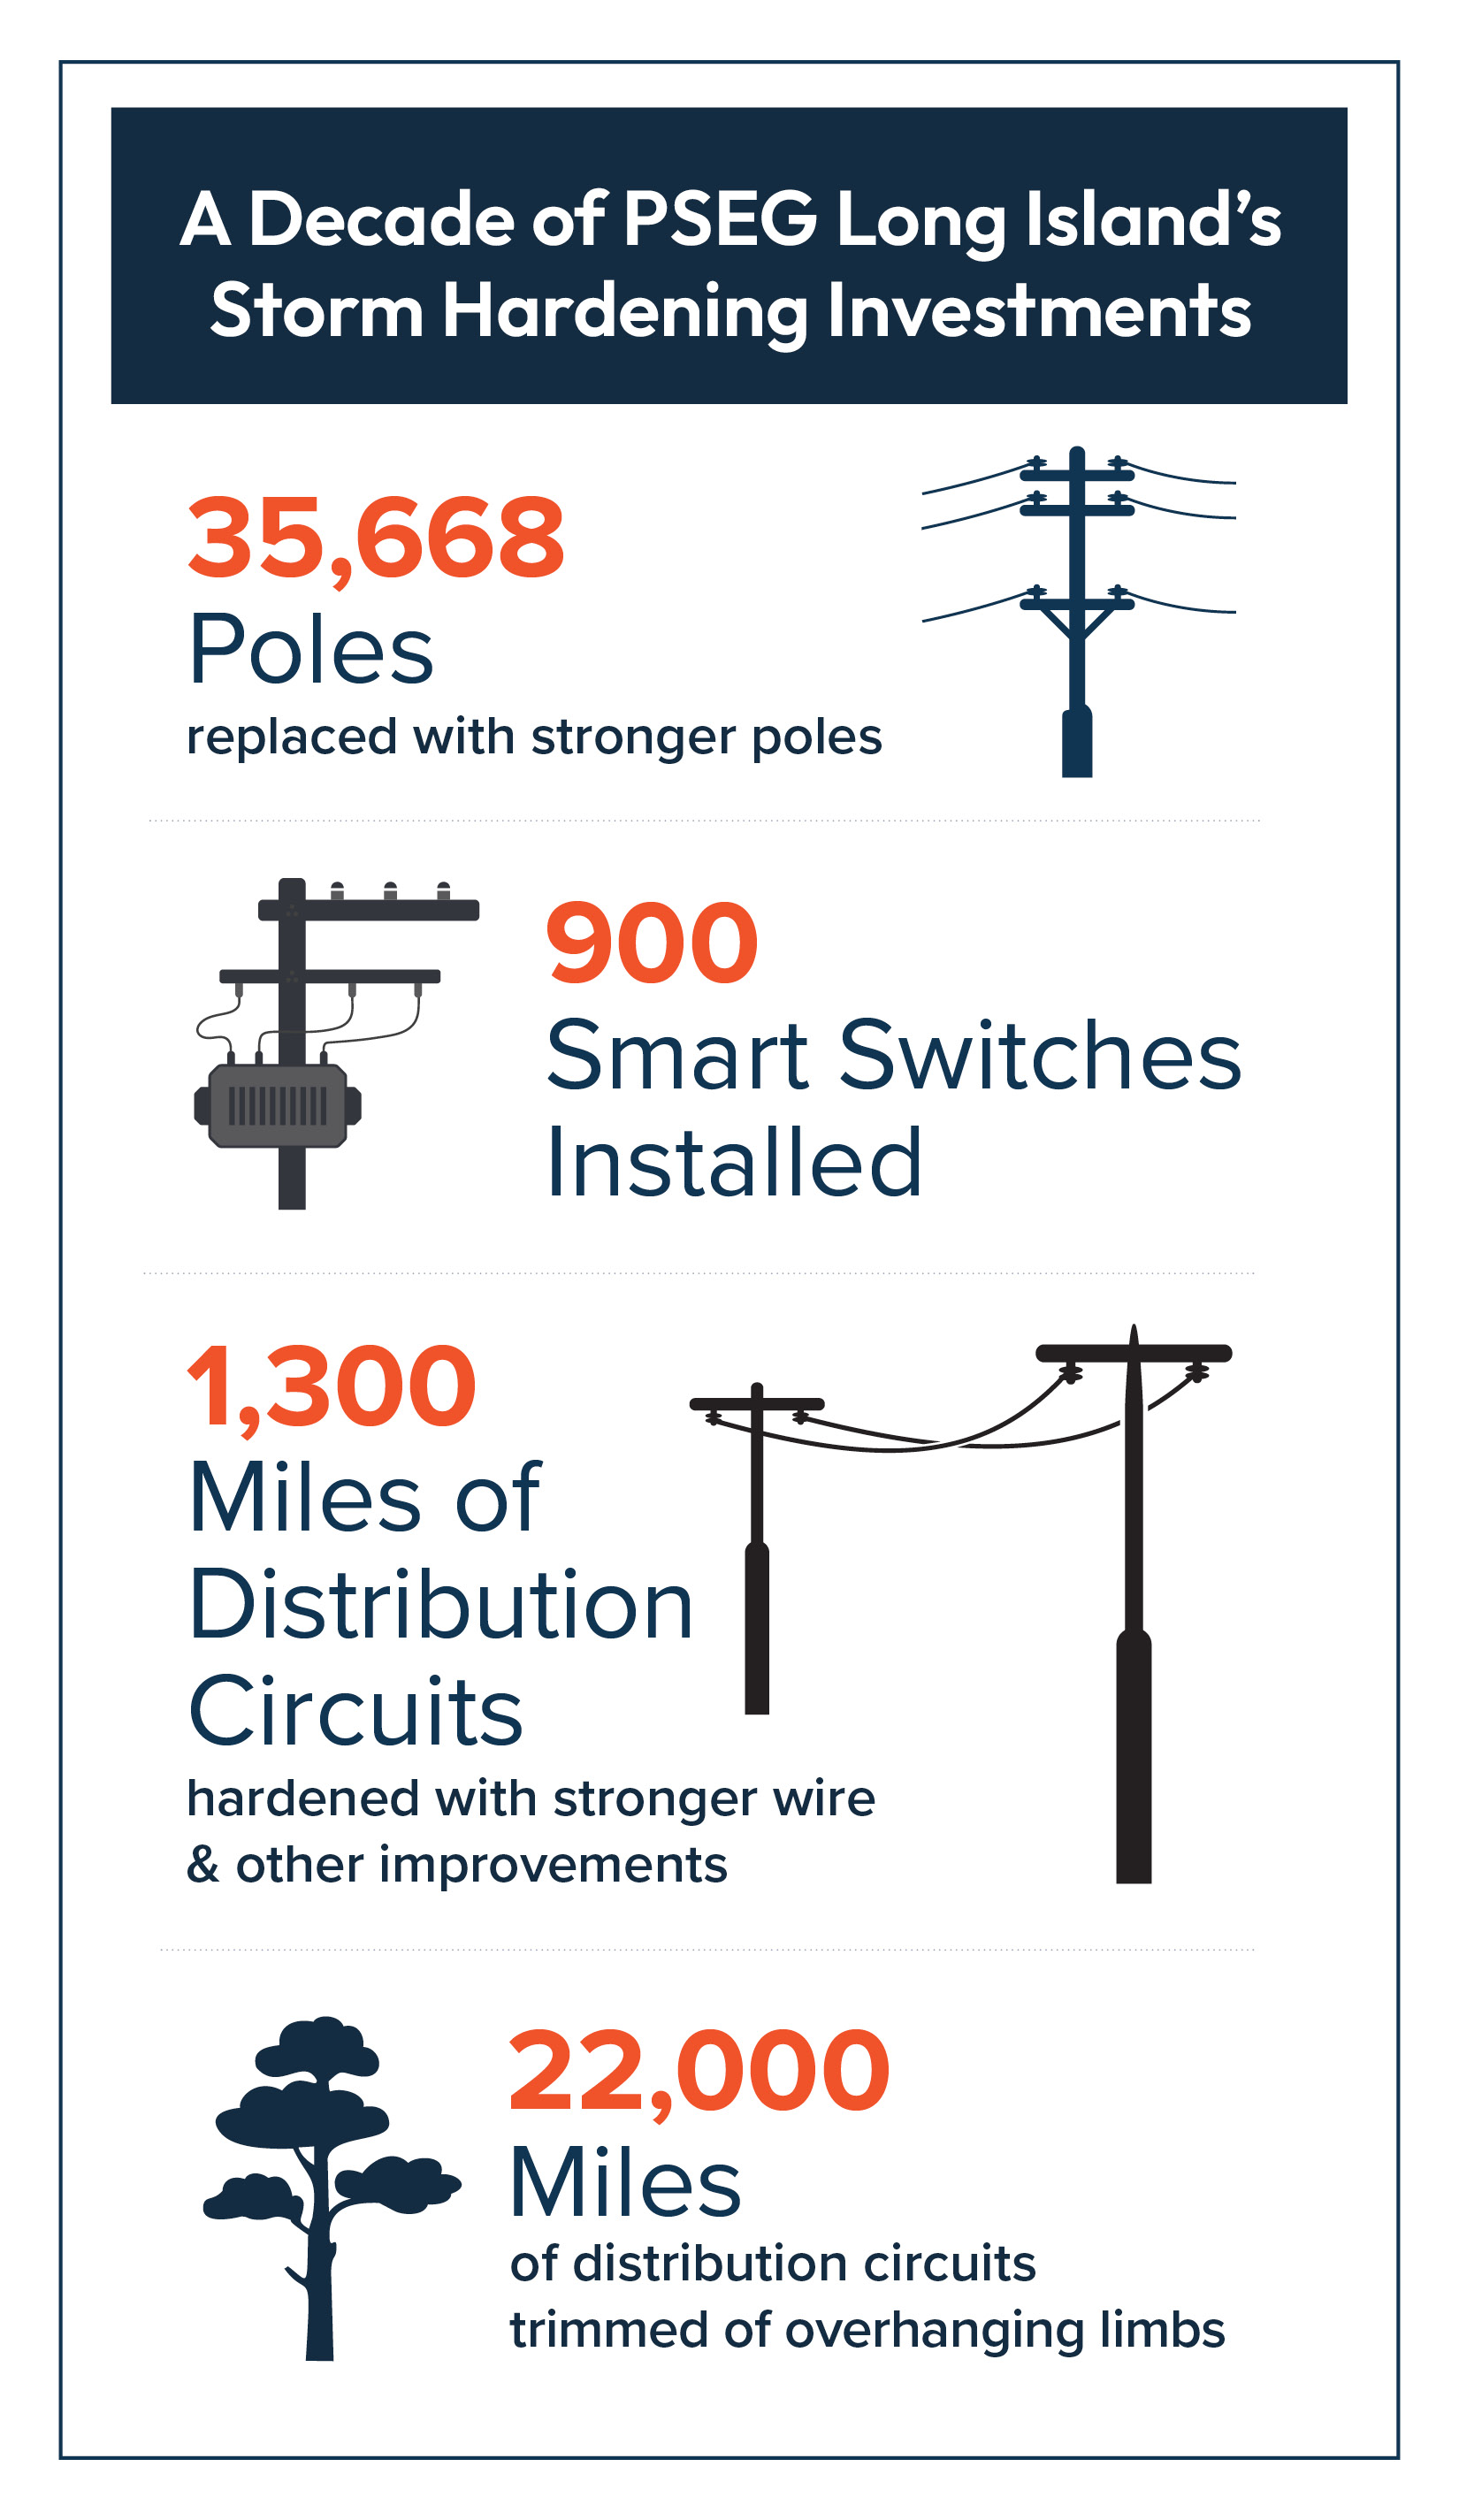 Infographic describing PSEG Long Island's storm hardening investments over the past decade.